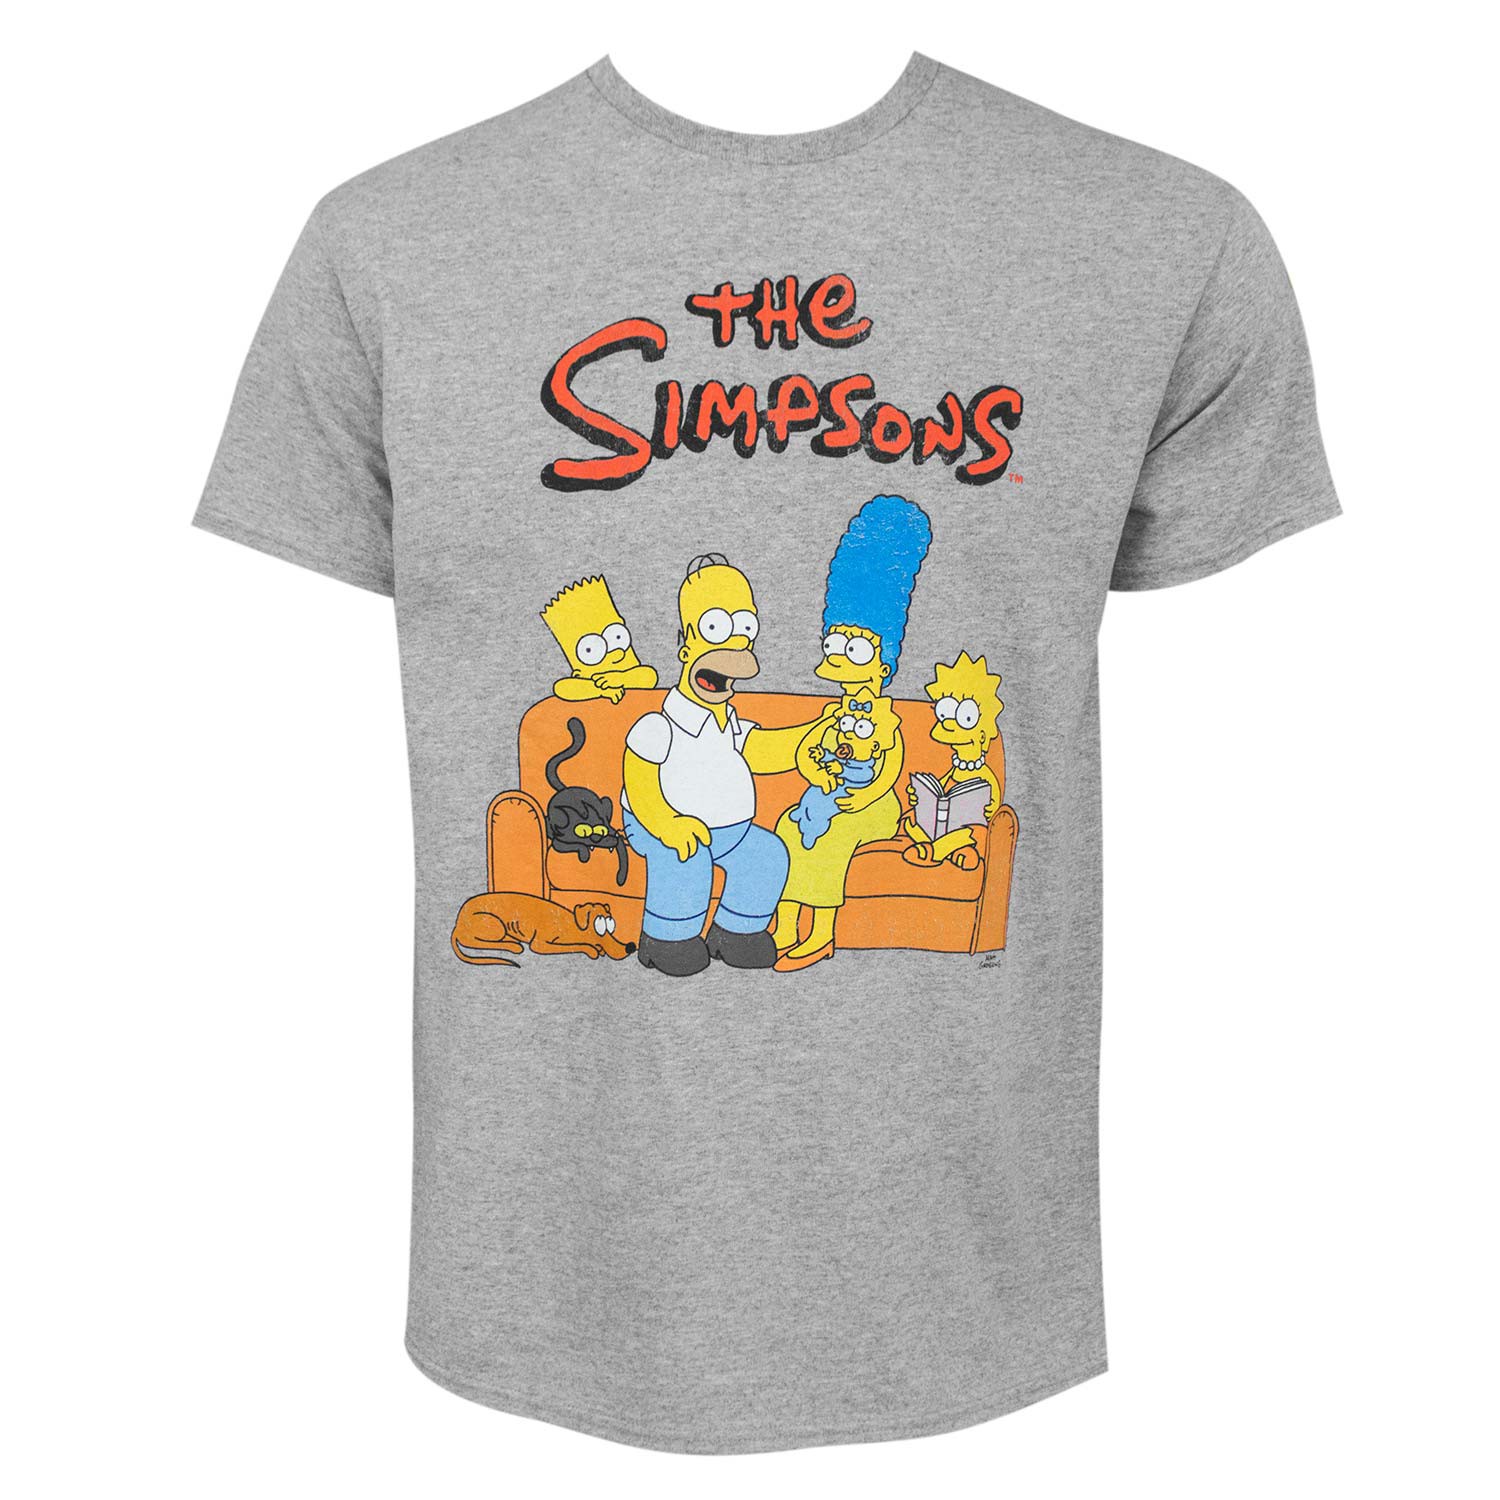 The Simpsons Couch Fam Tee Shirt